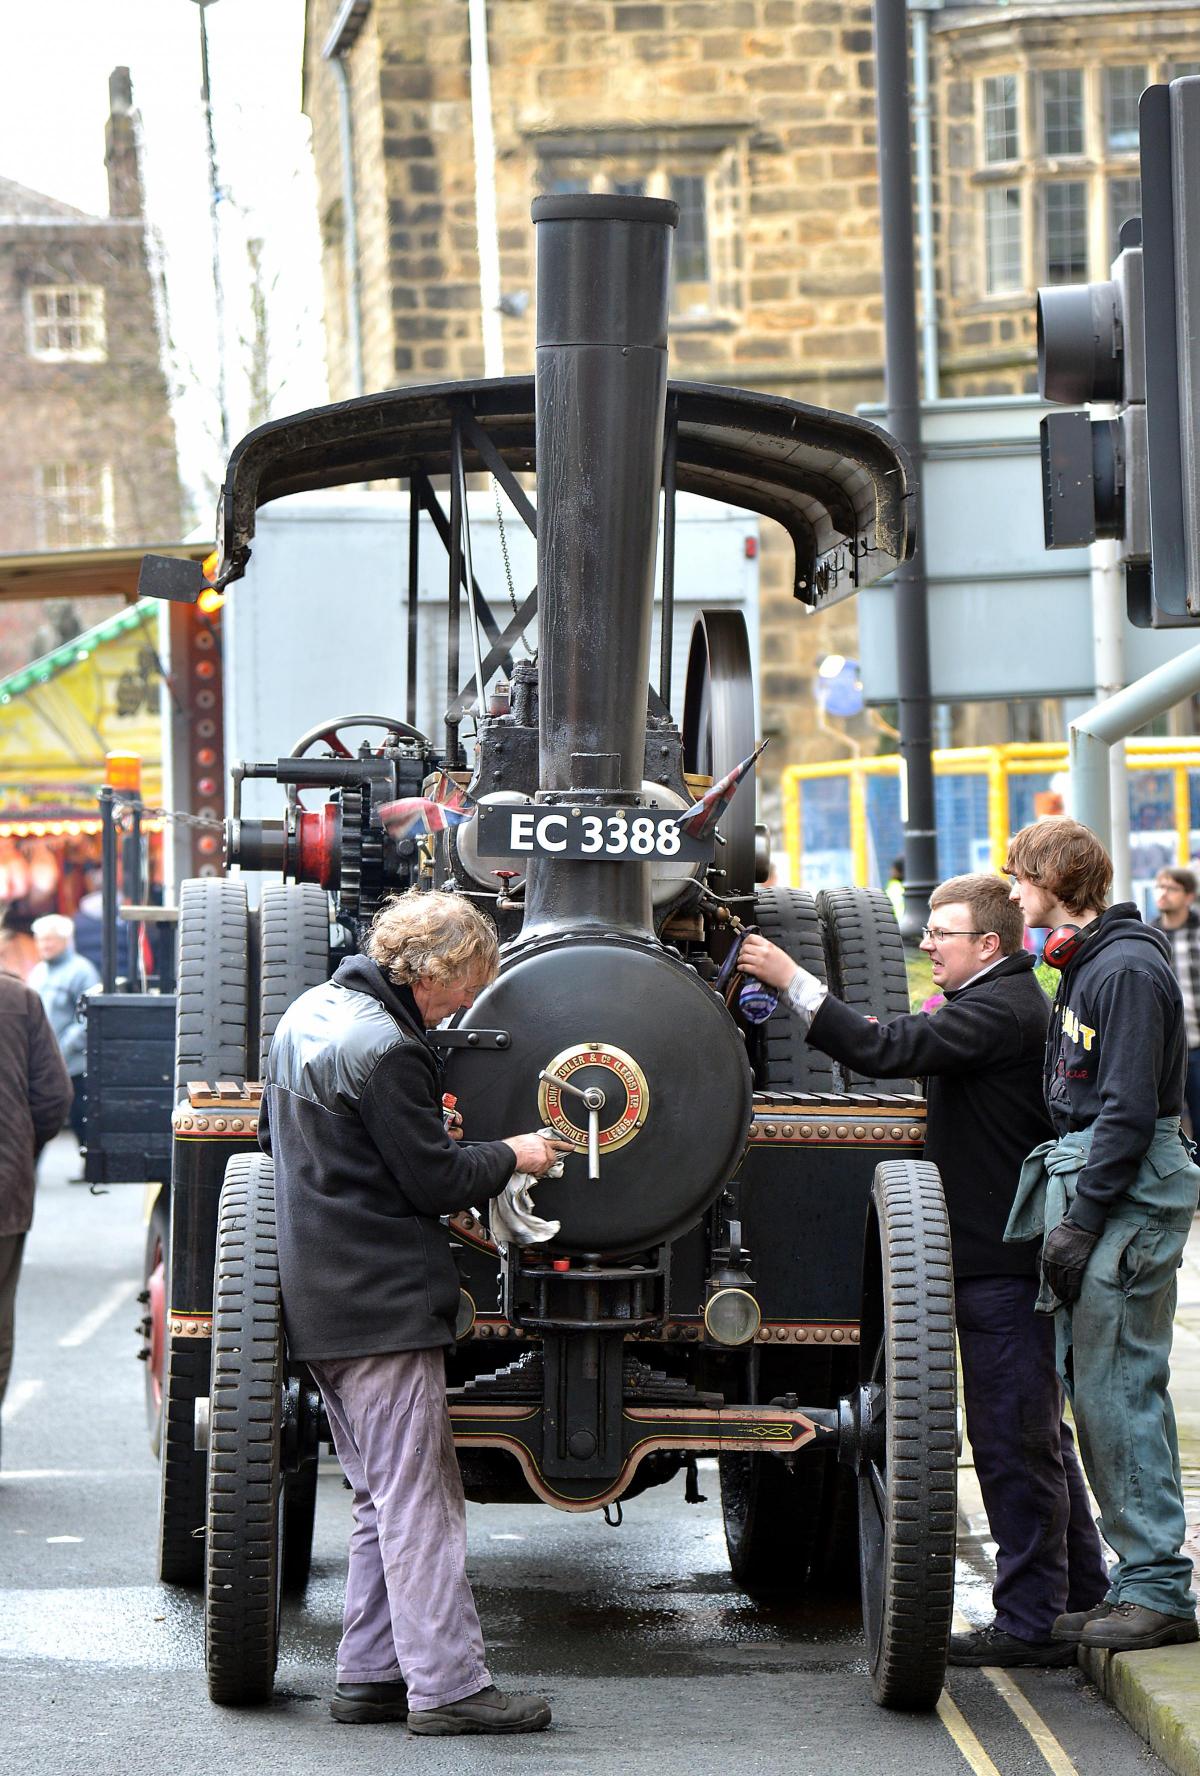 An old engine is being fired up by enthusiasts at the Otley Victorian Fair